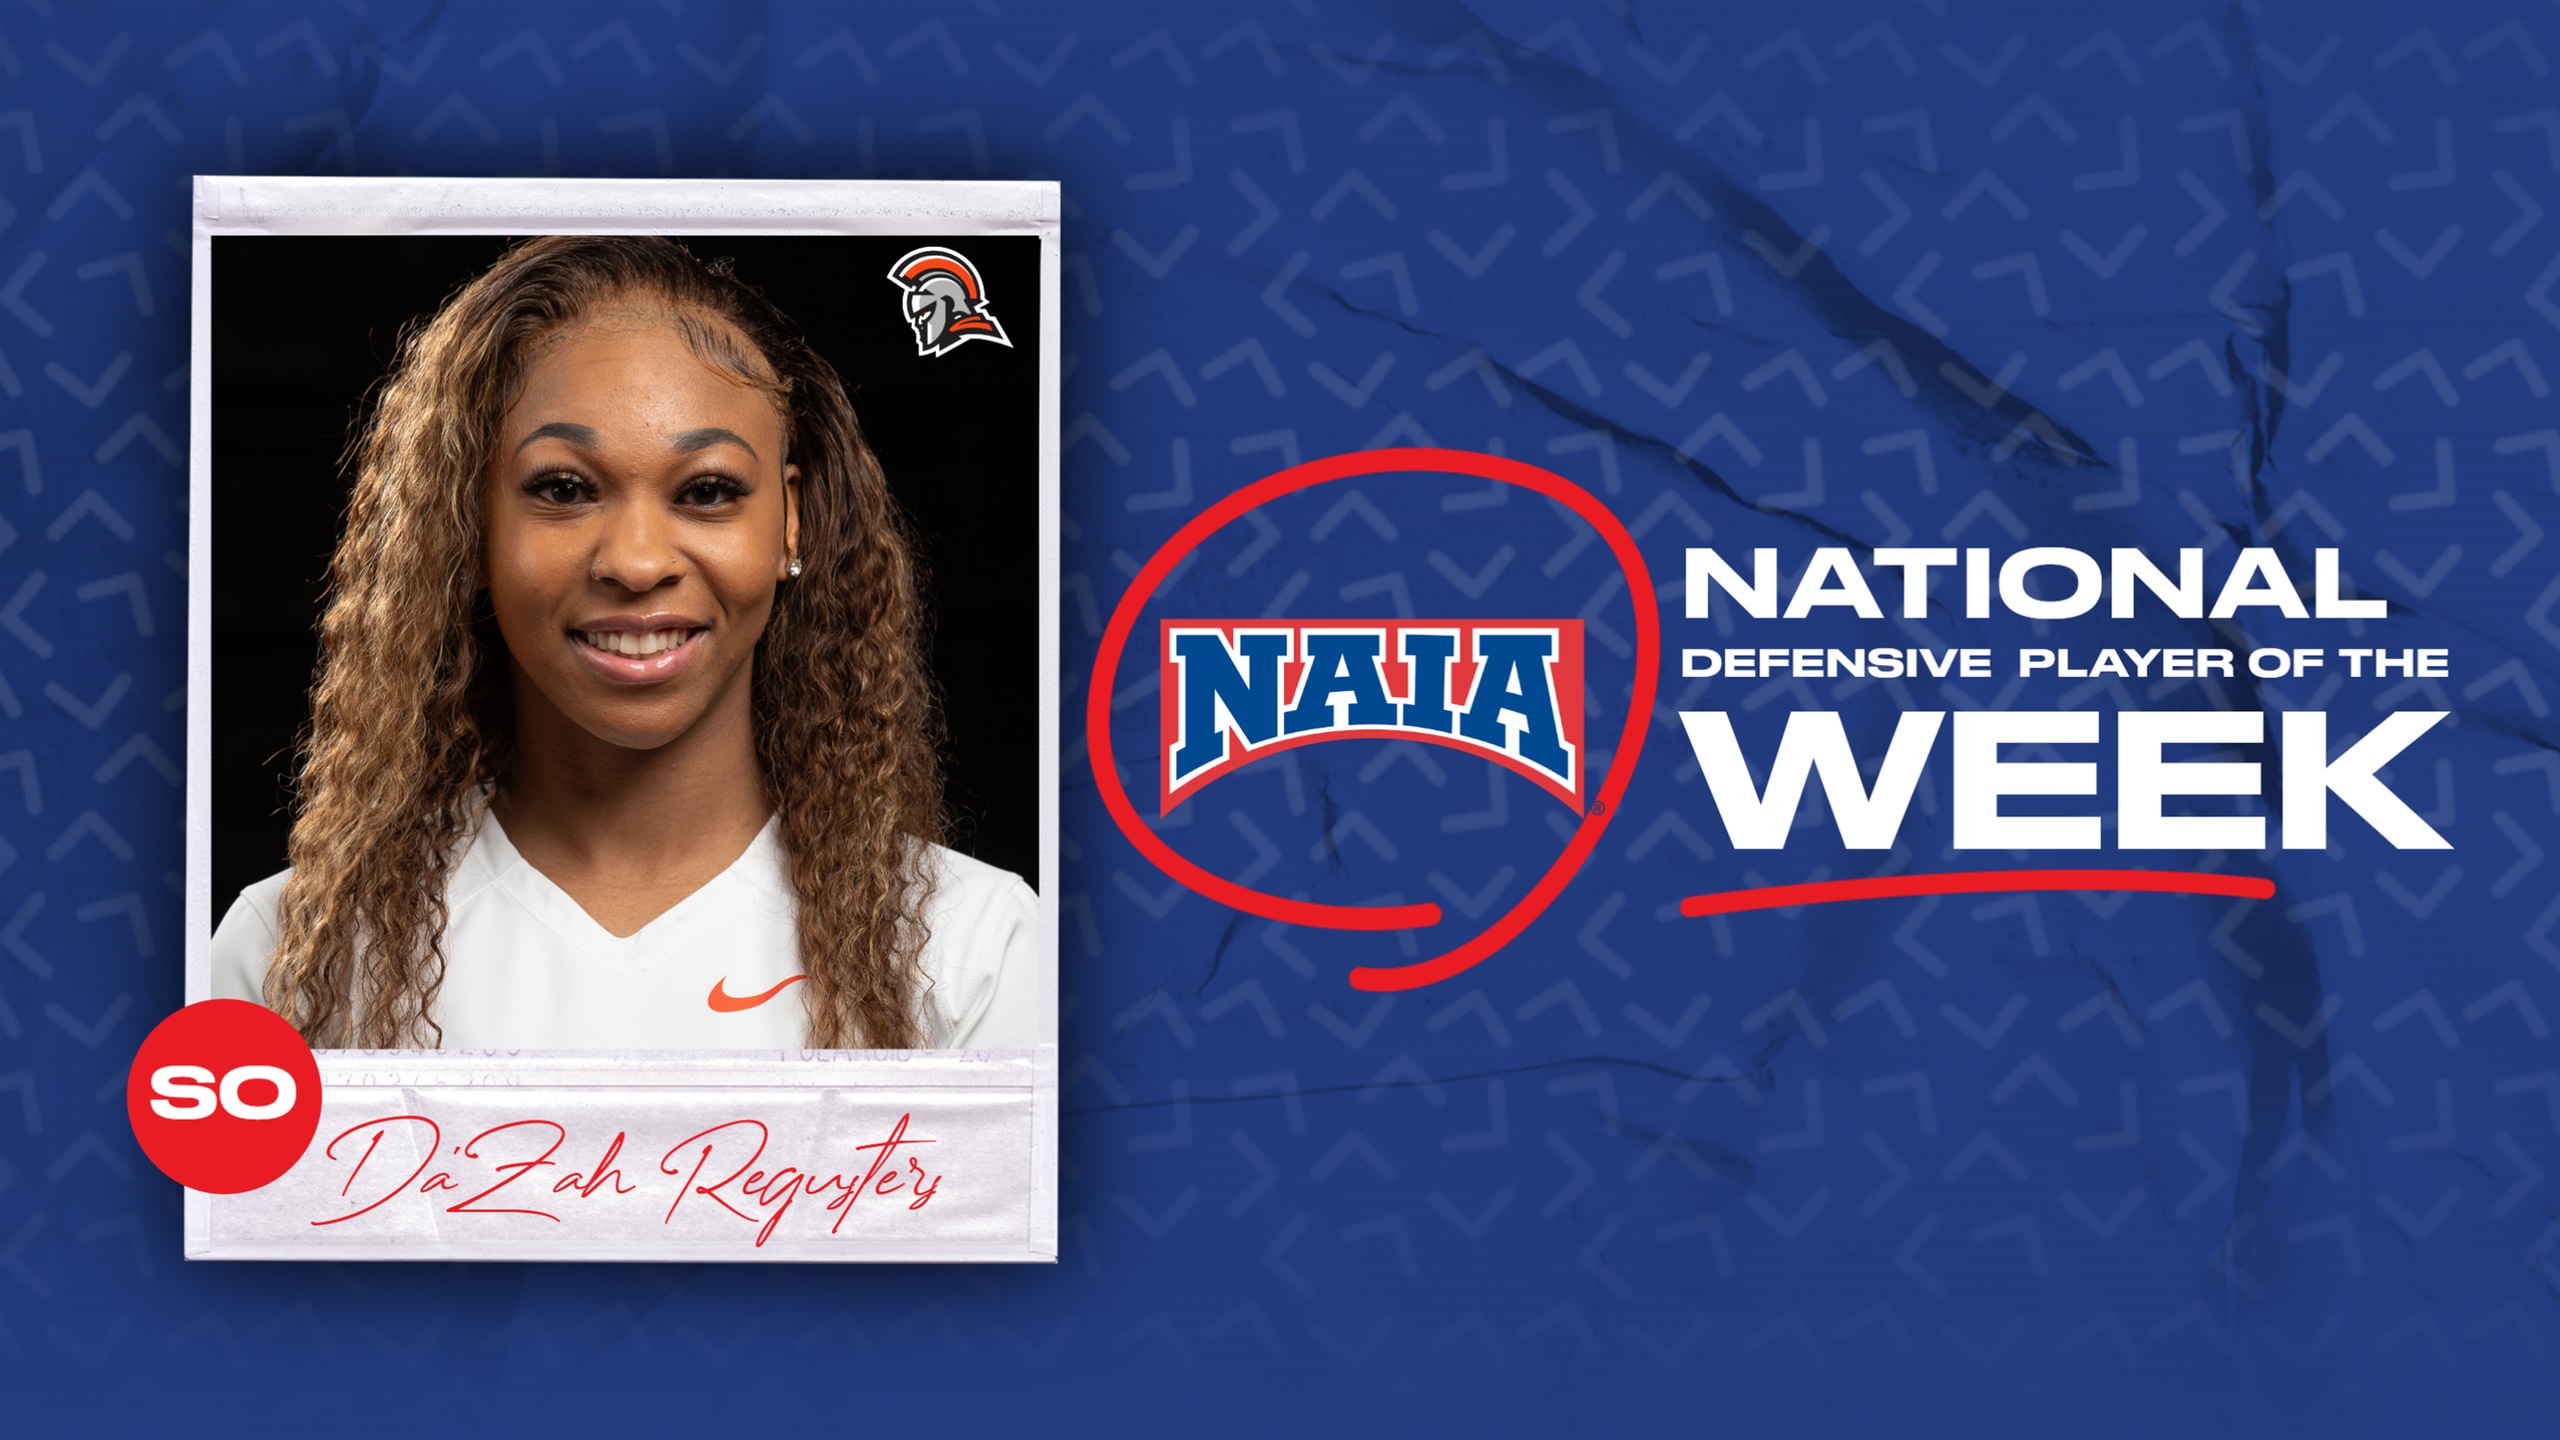 Indiana Tech's Da'Zah Regusters Named National Defense Player of the Week